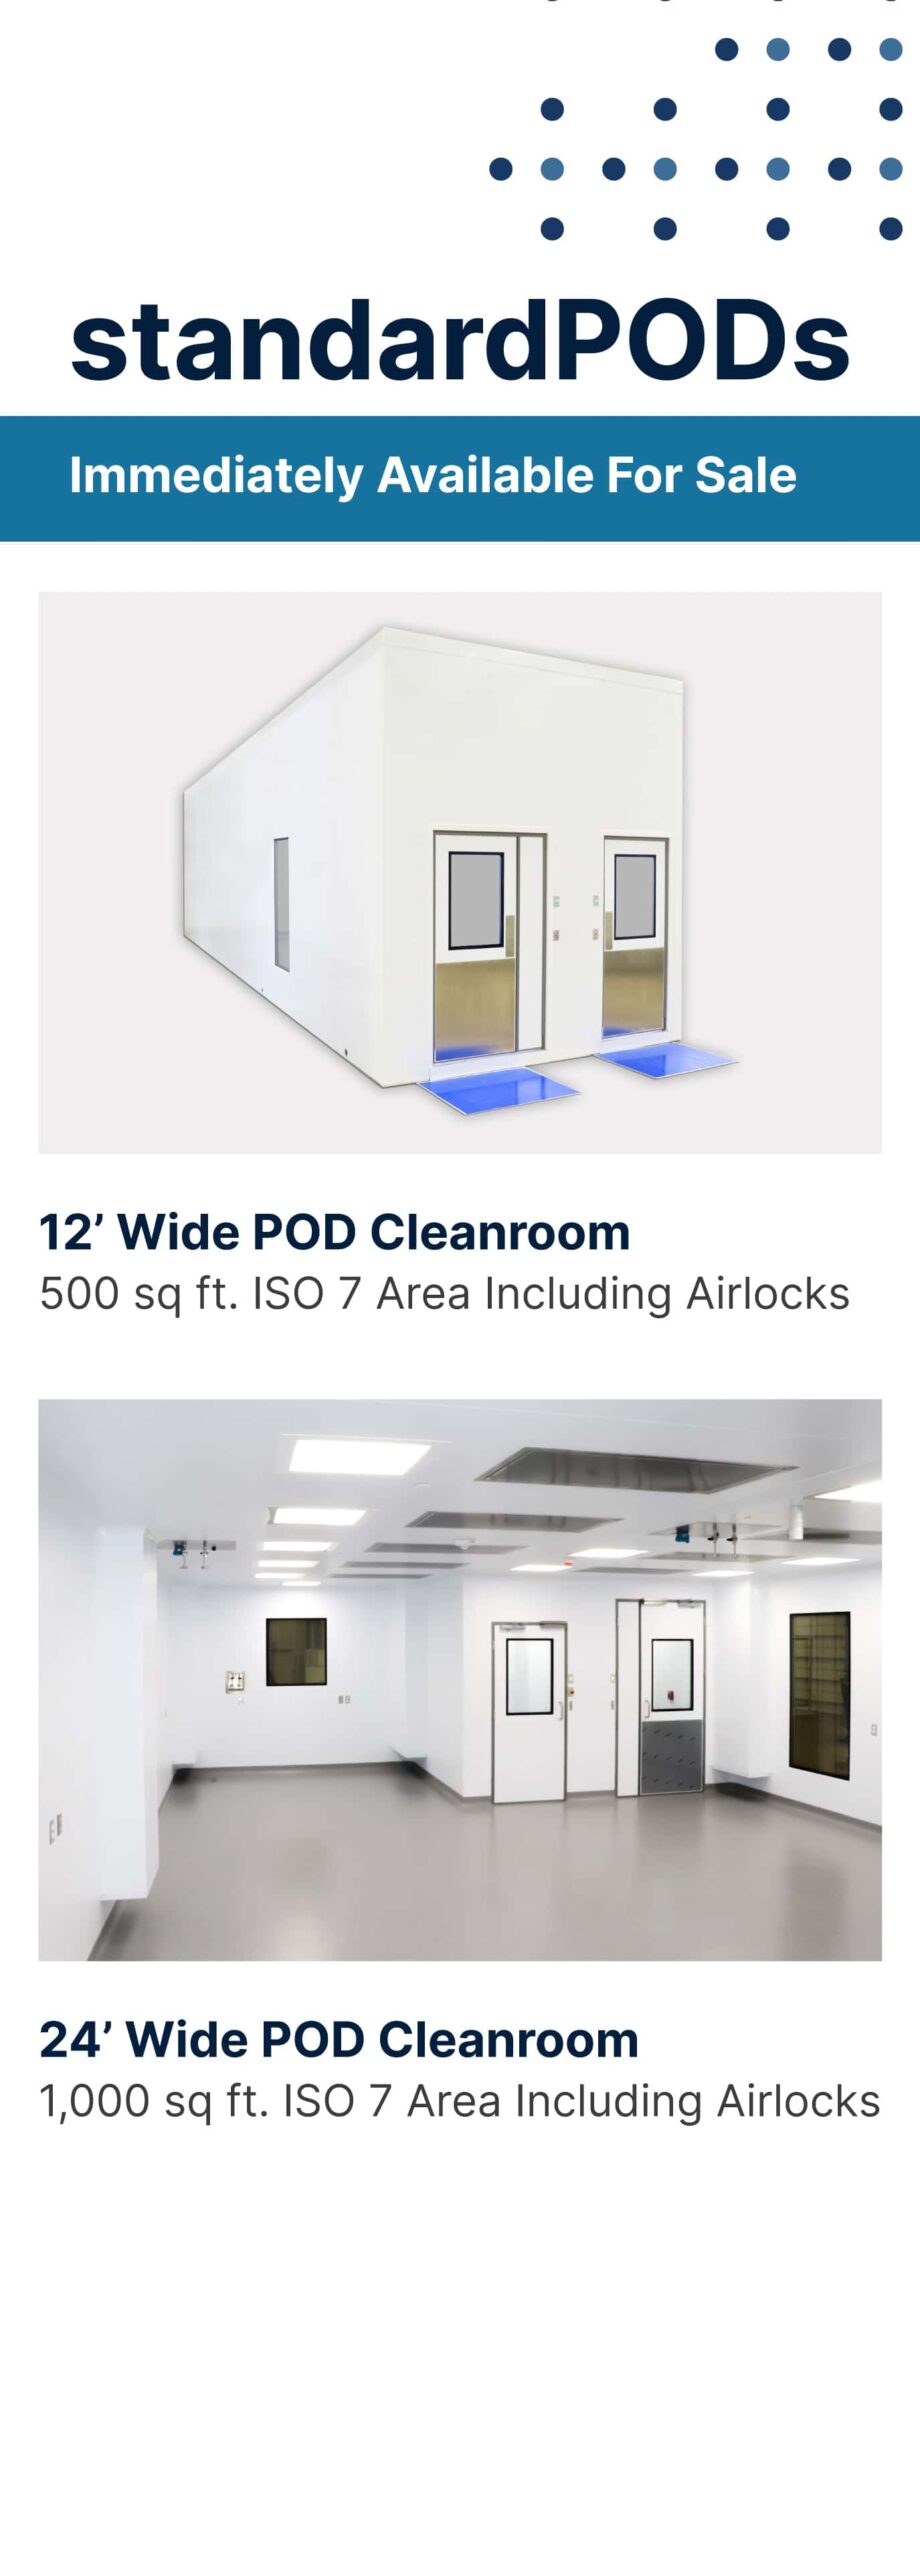 standard pods immediately available for sale click link to inquire.